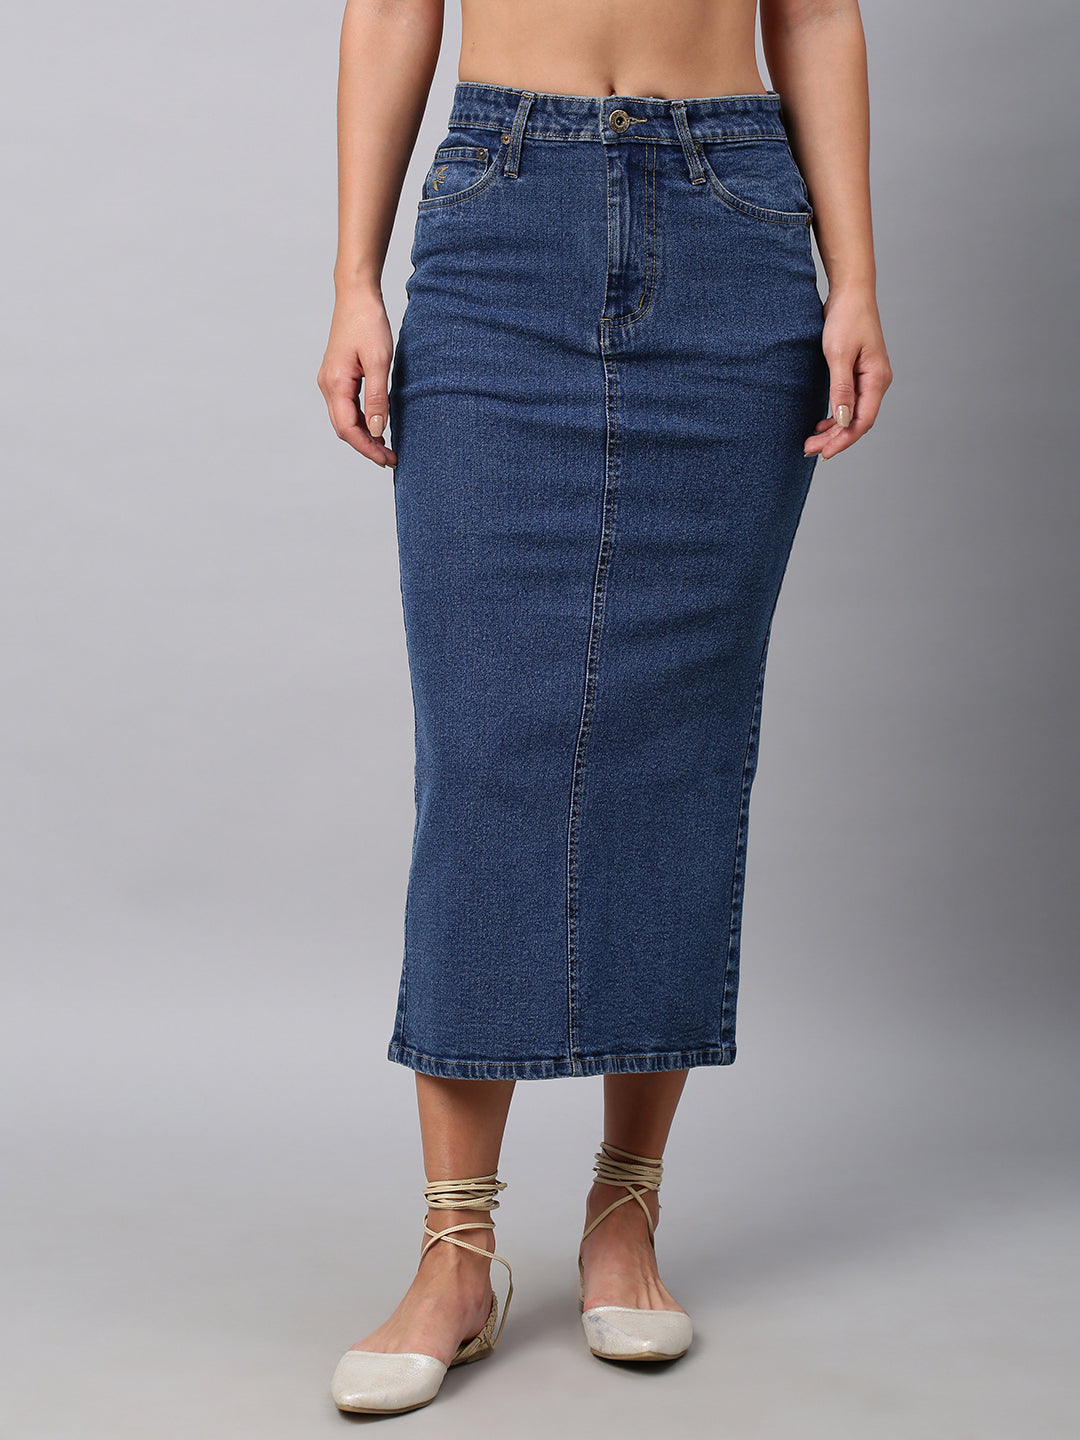 How to Wear Pencil Denim Skirt in Style - Style.Fashion.Trend - News,  Celebrities, Lifestyle, Beauty & Entertainment -